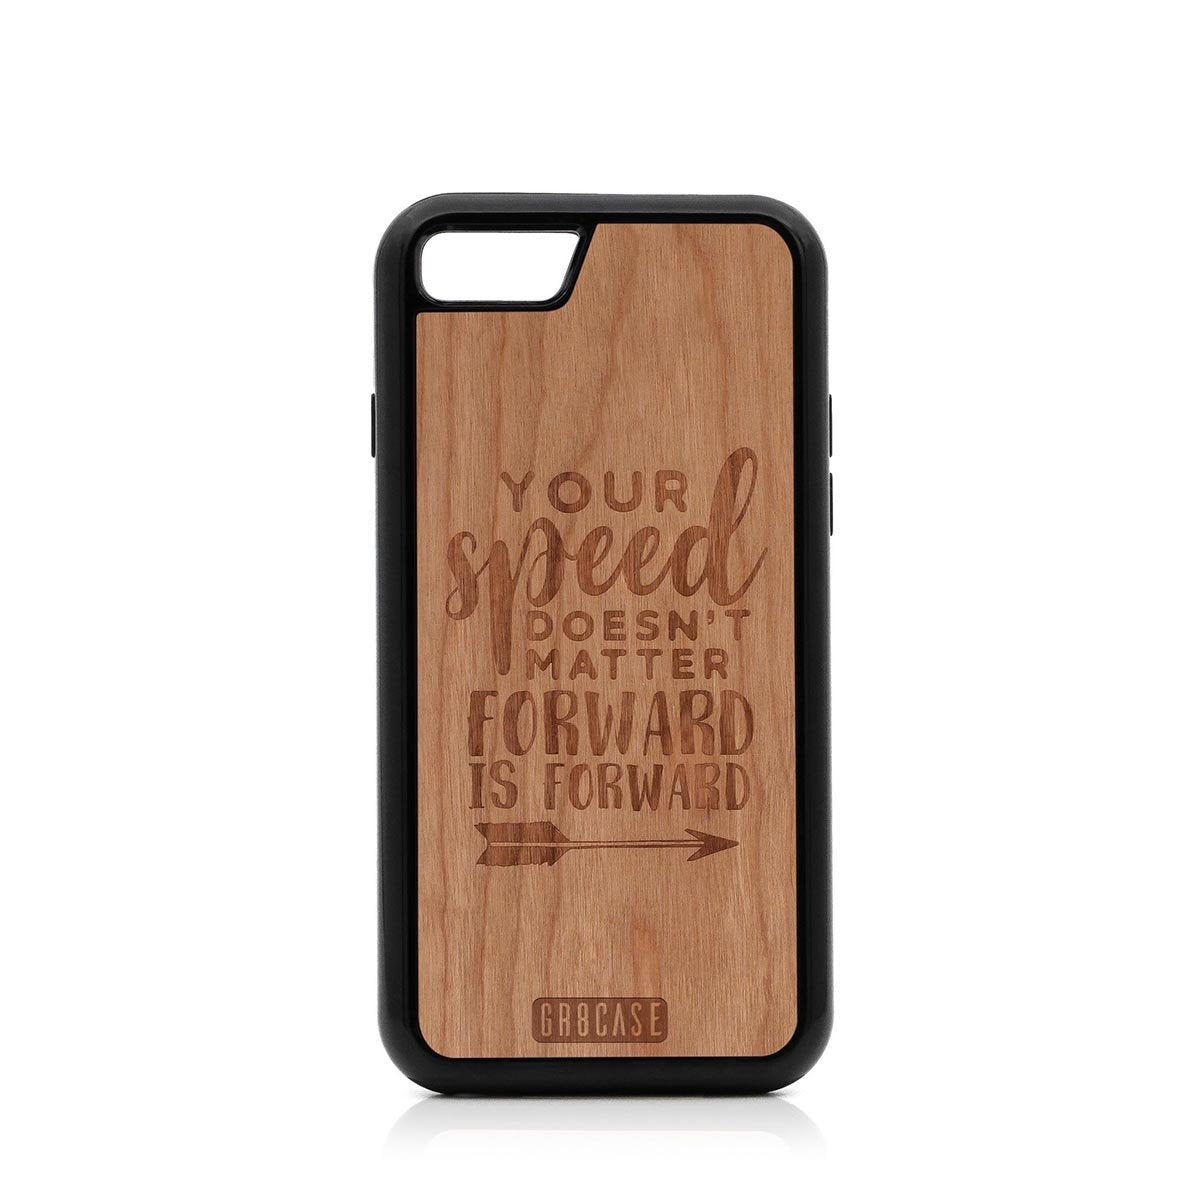 Your Speed Doesn't Matter Forward Is Forward Design Wood Case For iPhone SE 2020